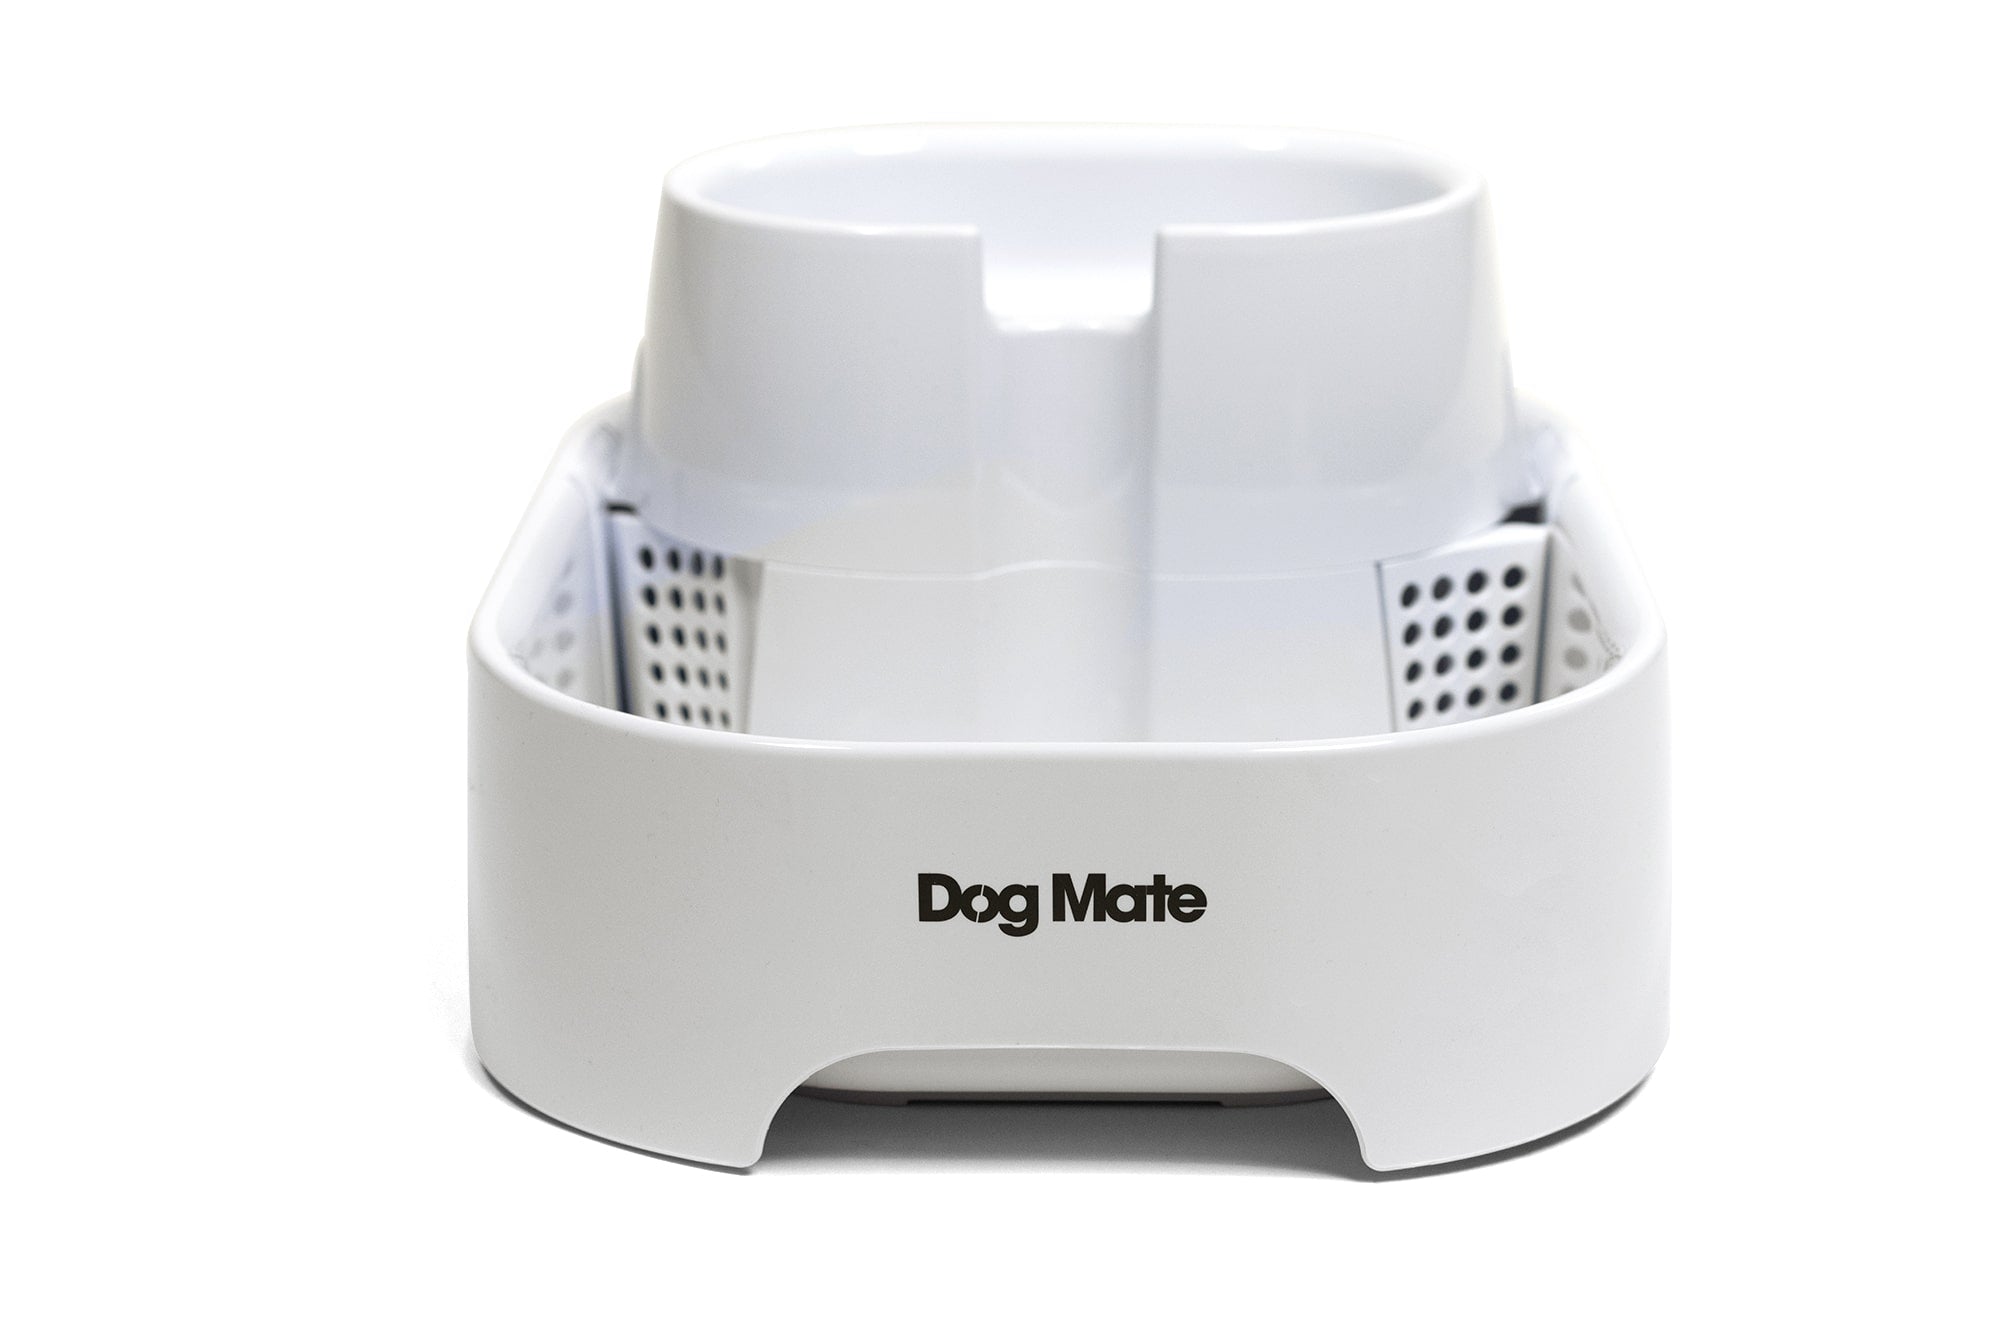 Dog Mate Large Two-level Six-litre Pet Fountain – White (385)